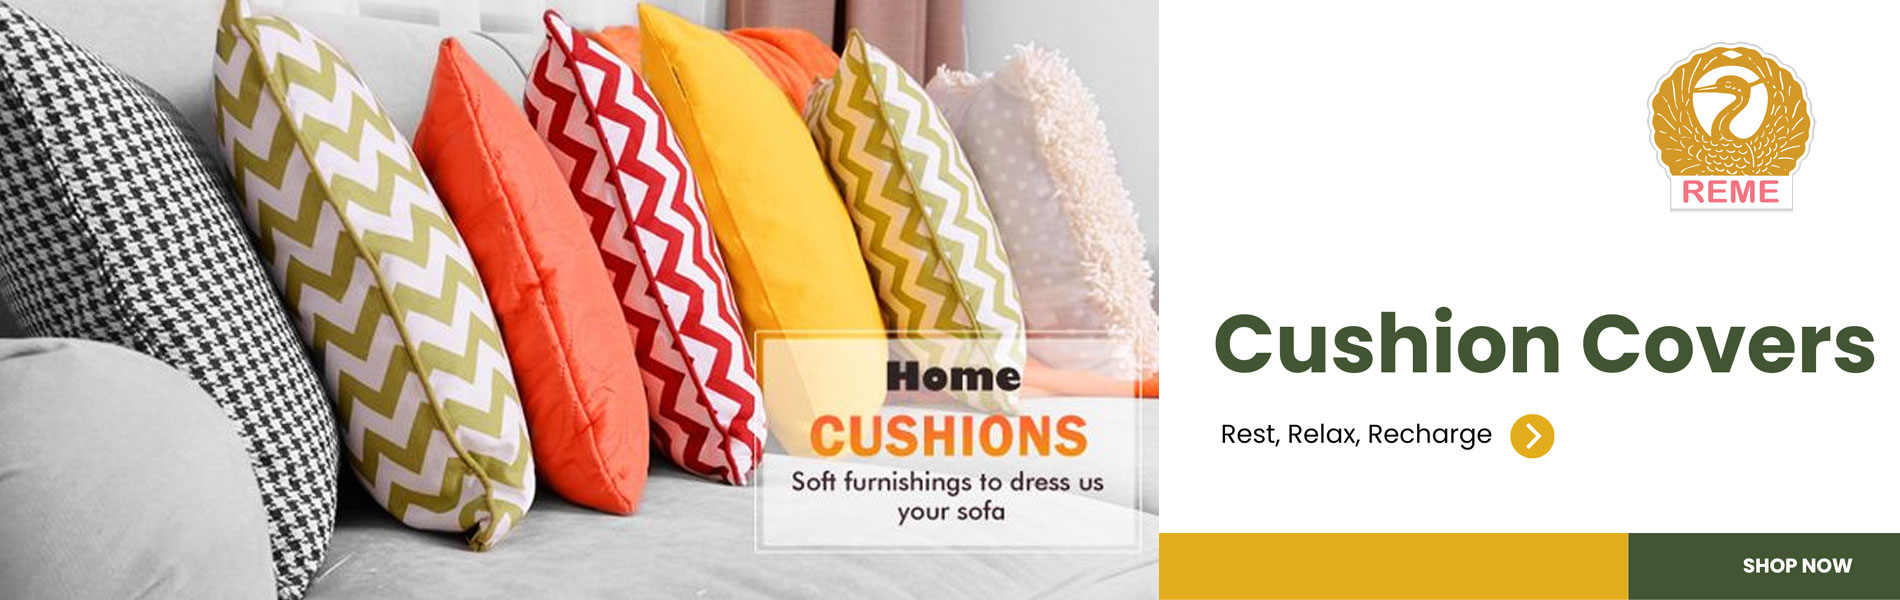 Reme Lifestyle Website Banner (Cushion Covers Collection)